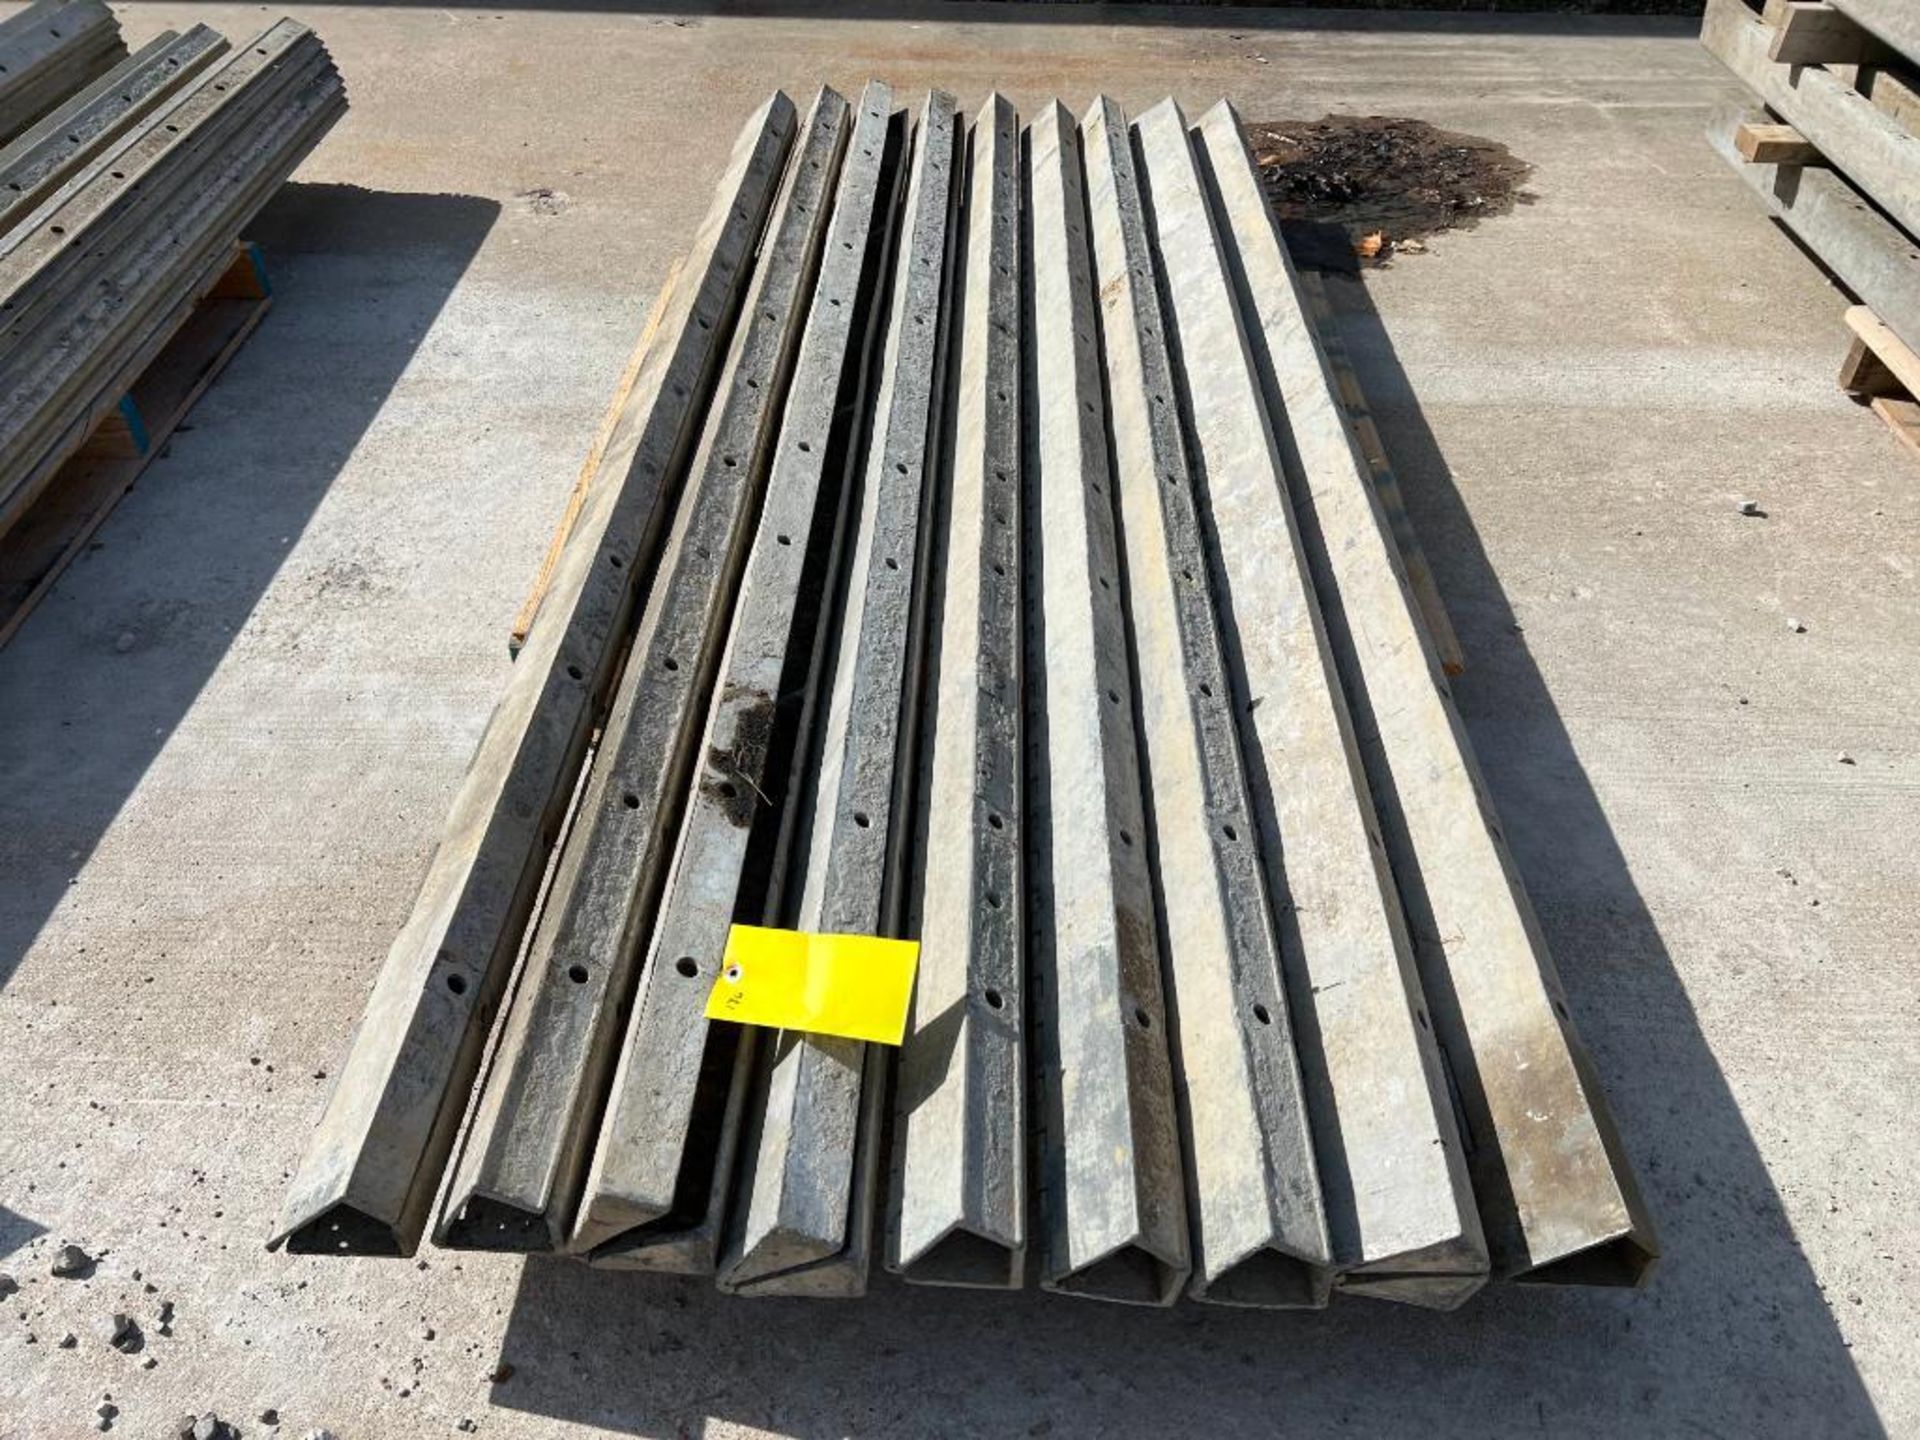 (9) 4" x 4" x8' Hinged Smooth Wall Ties Aluminum Concrete Forms, 8" Hole Pattern. Located in Mt. Ple